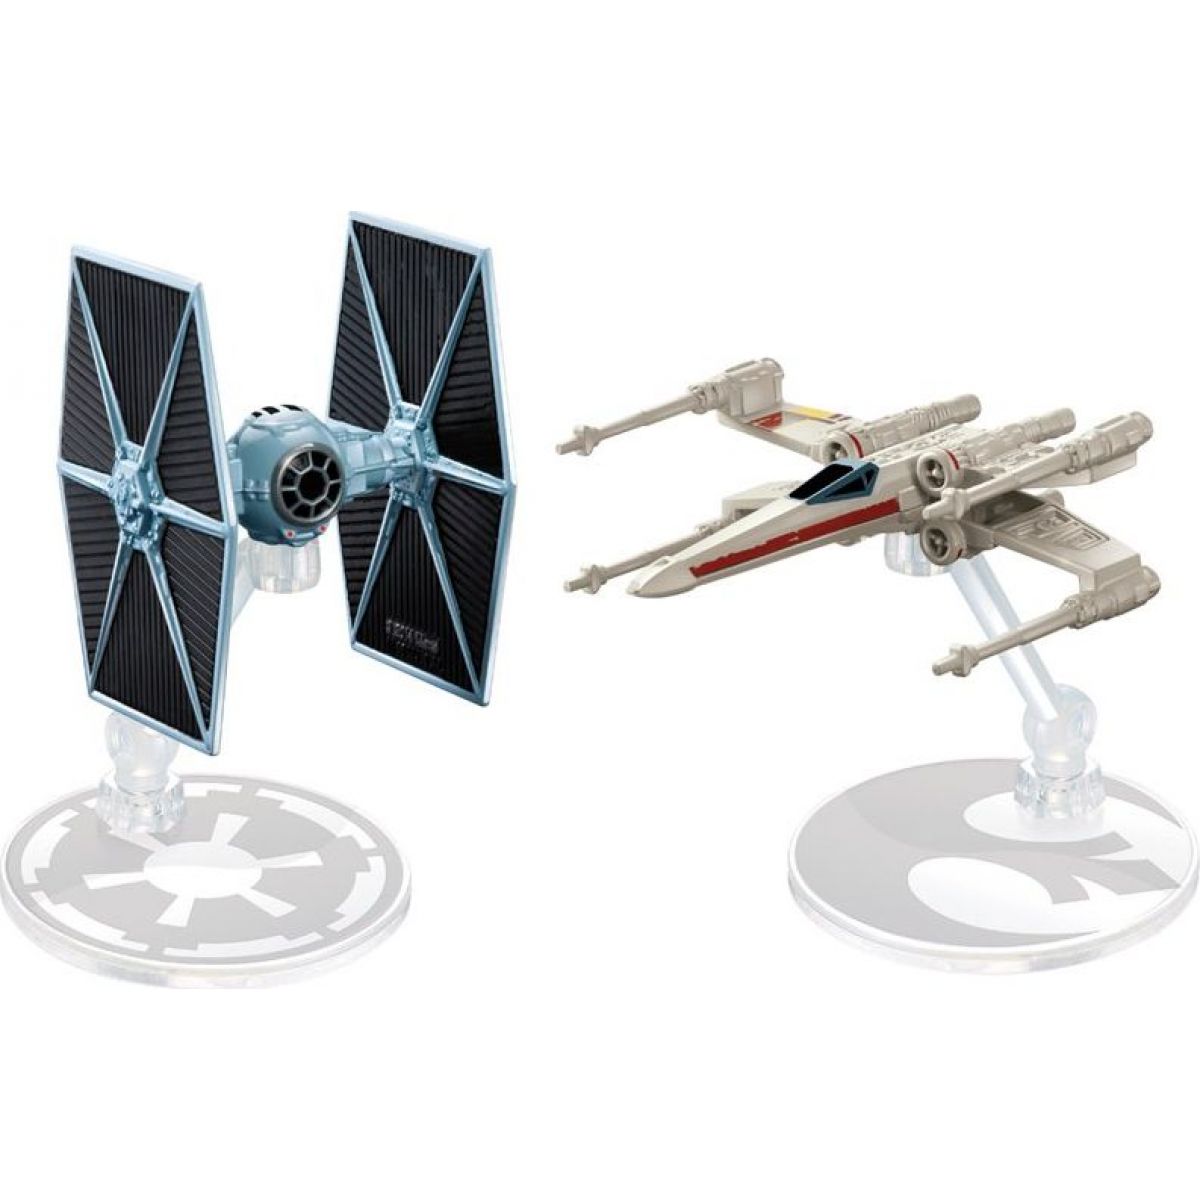 Hot Wheels Star Wars Starship - Tie Fighter vs. X-Wing Fighter DYH44